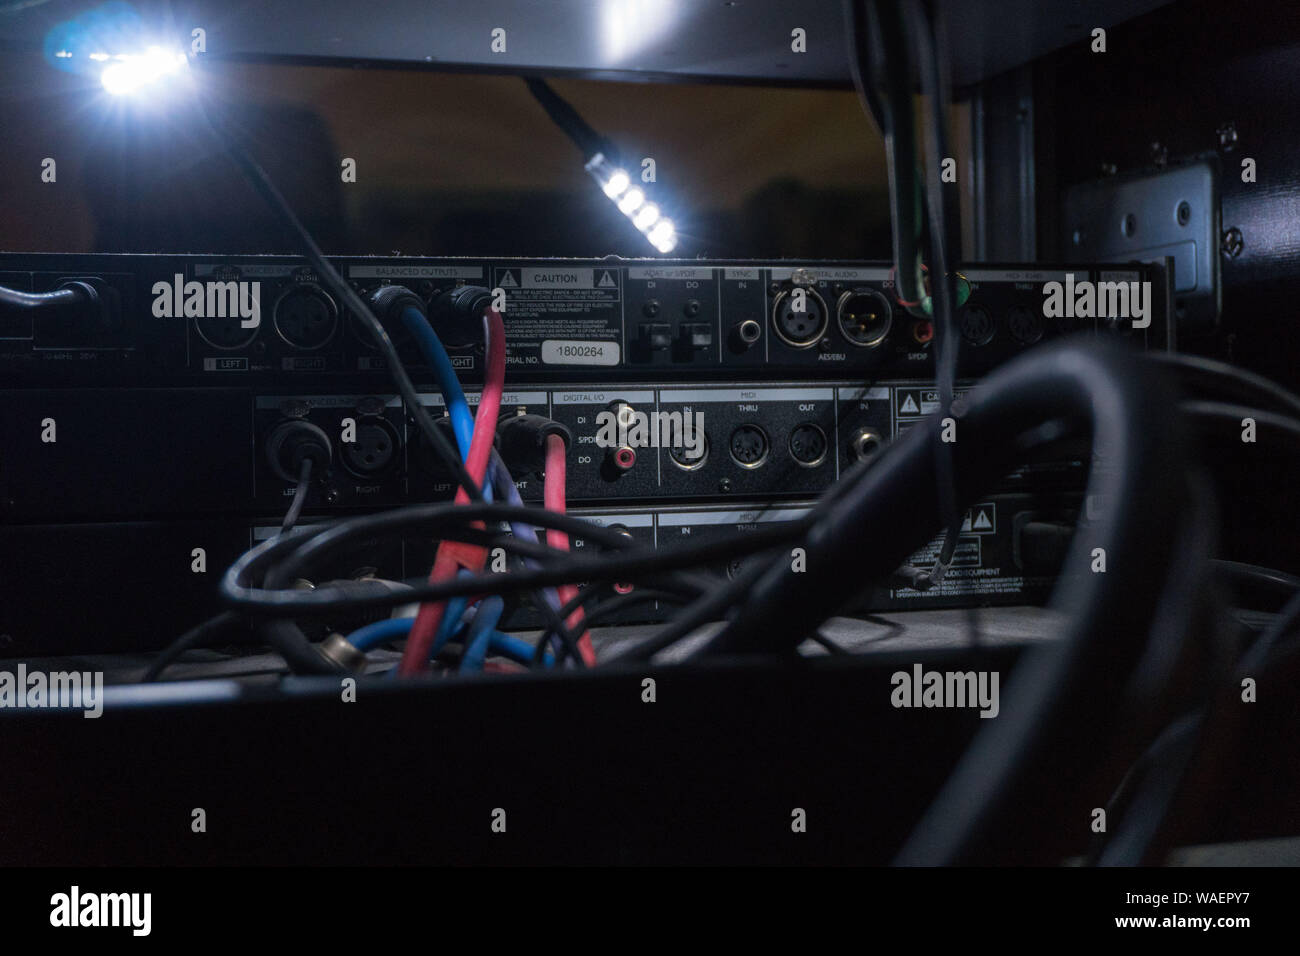 The connectors and the wires leading to the audio apparatus in a recording Studio. The workplace of the sound engineer Stock Photo